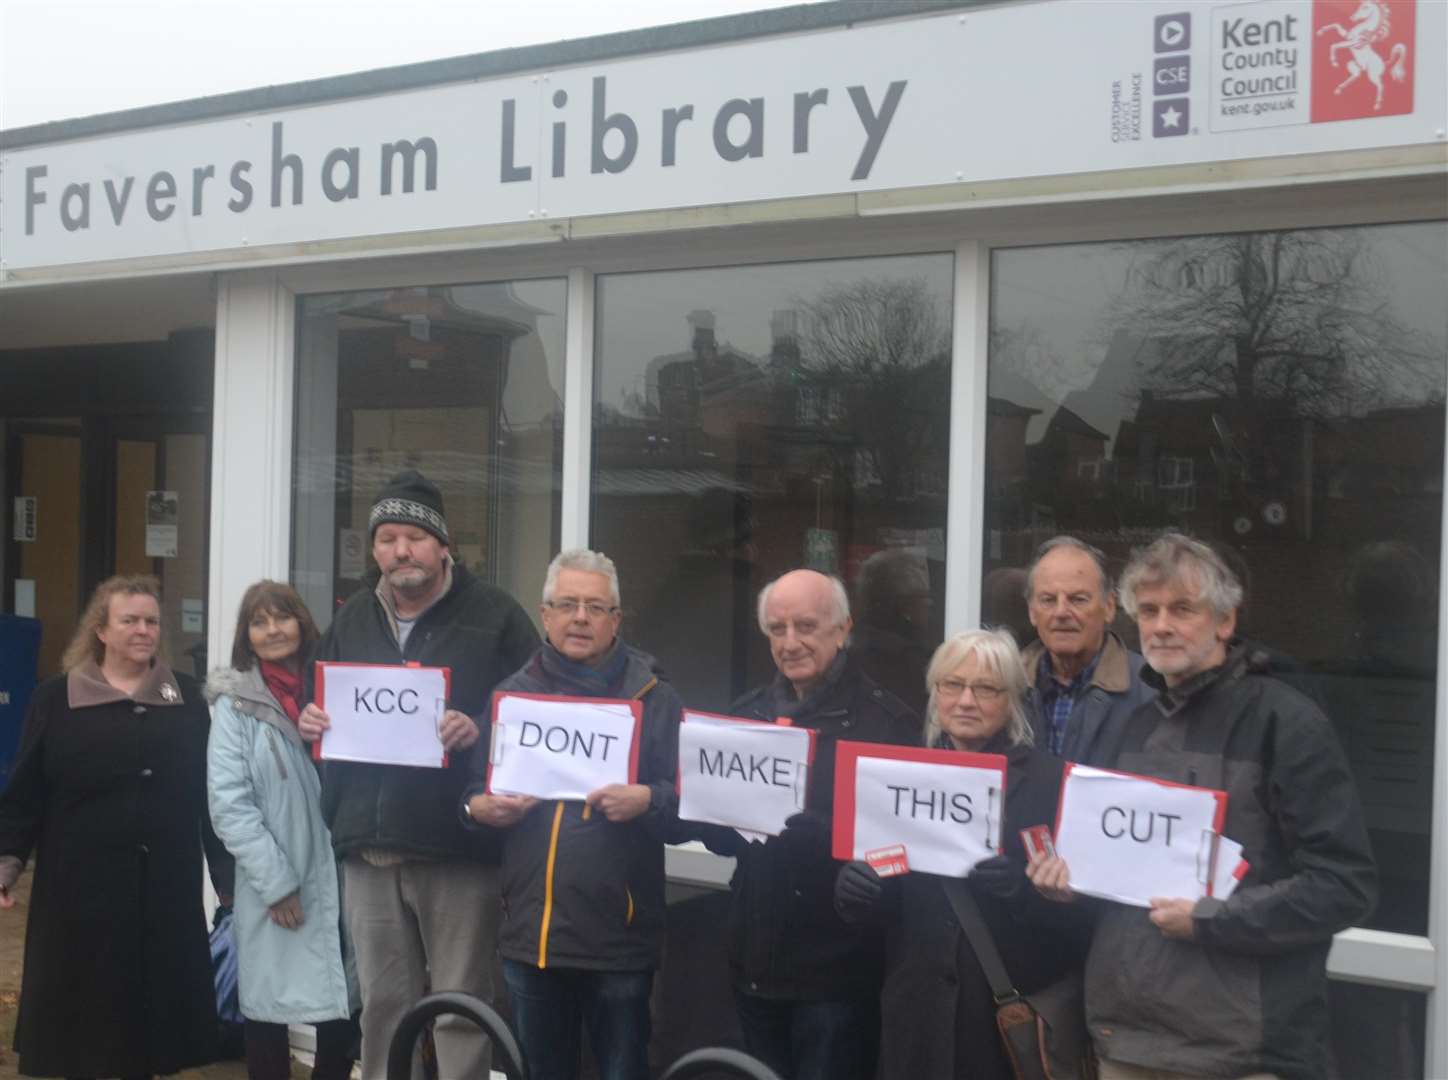 Library users held a protest against proposed cuts